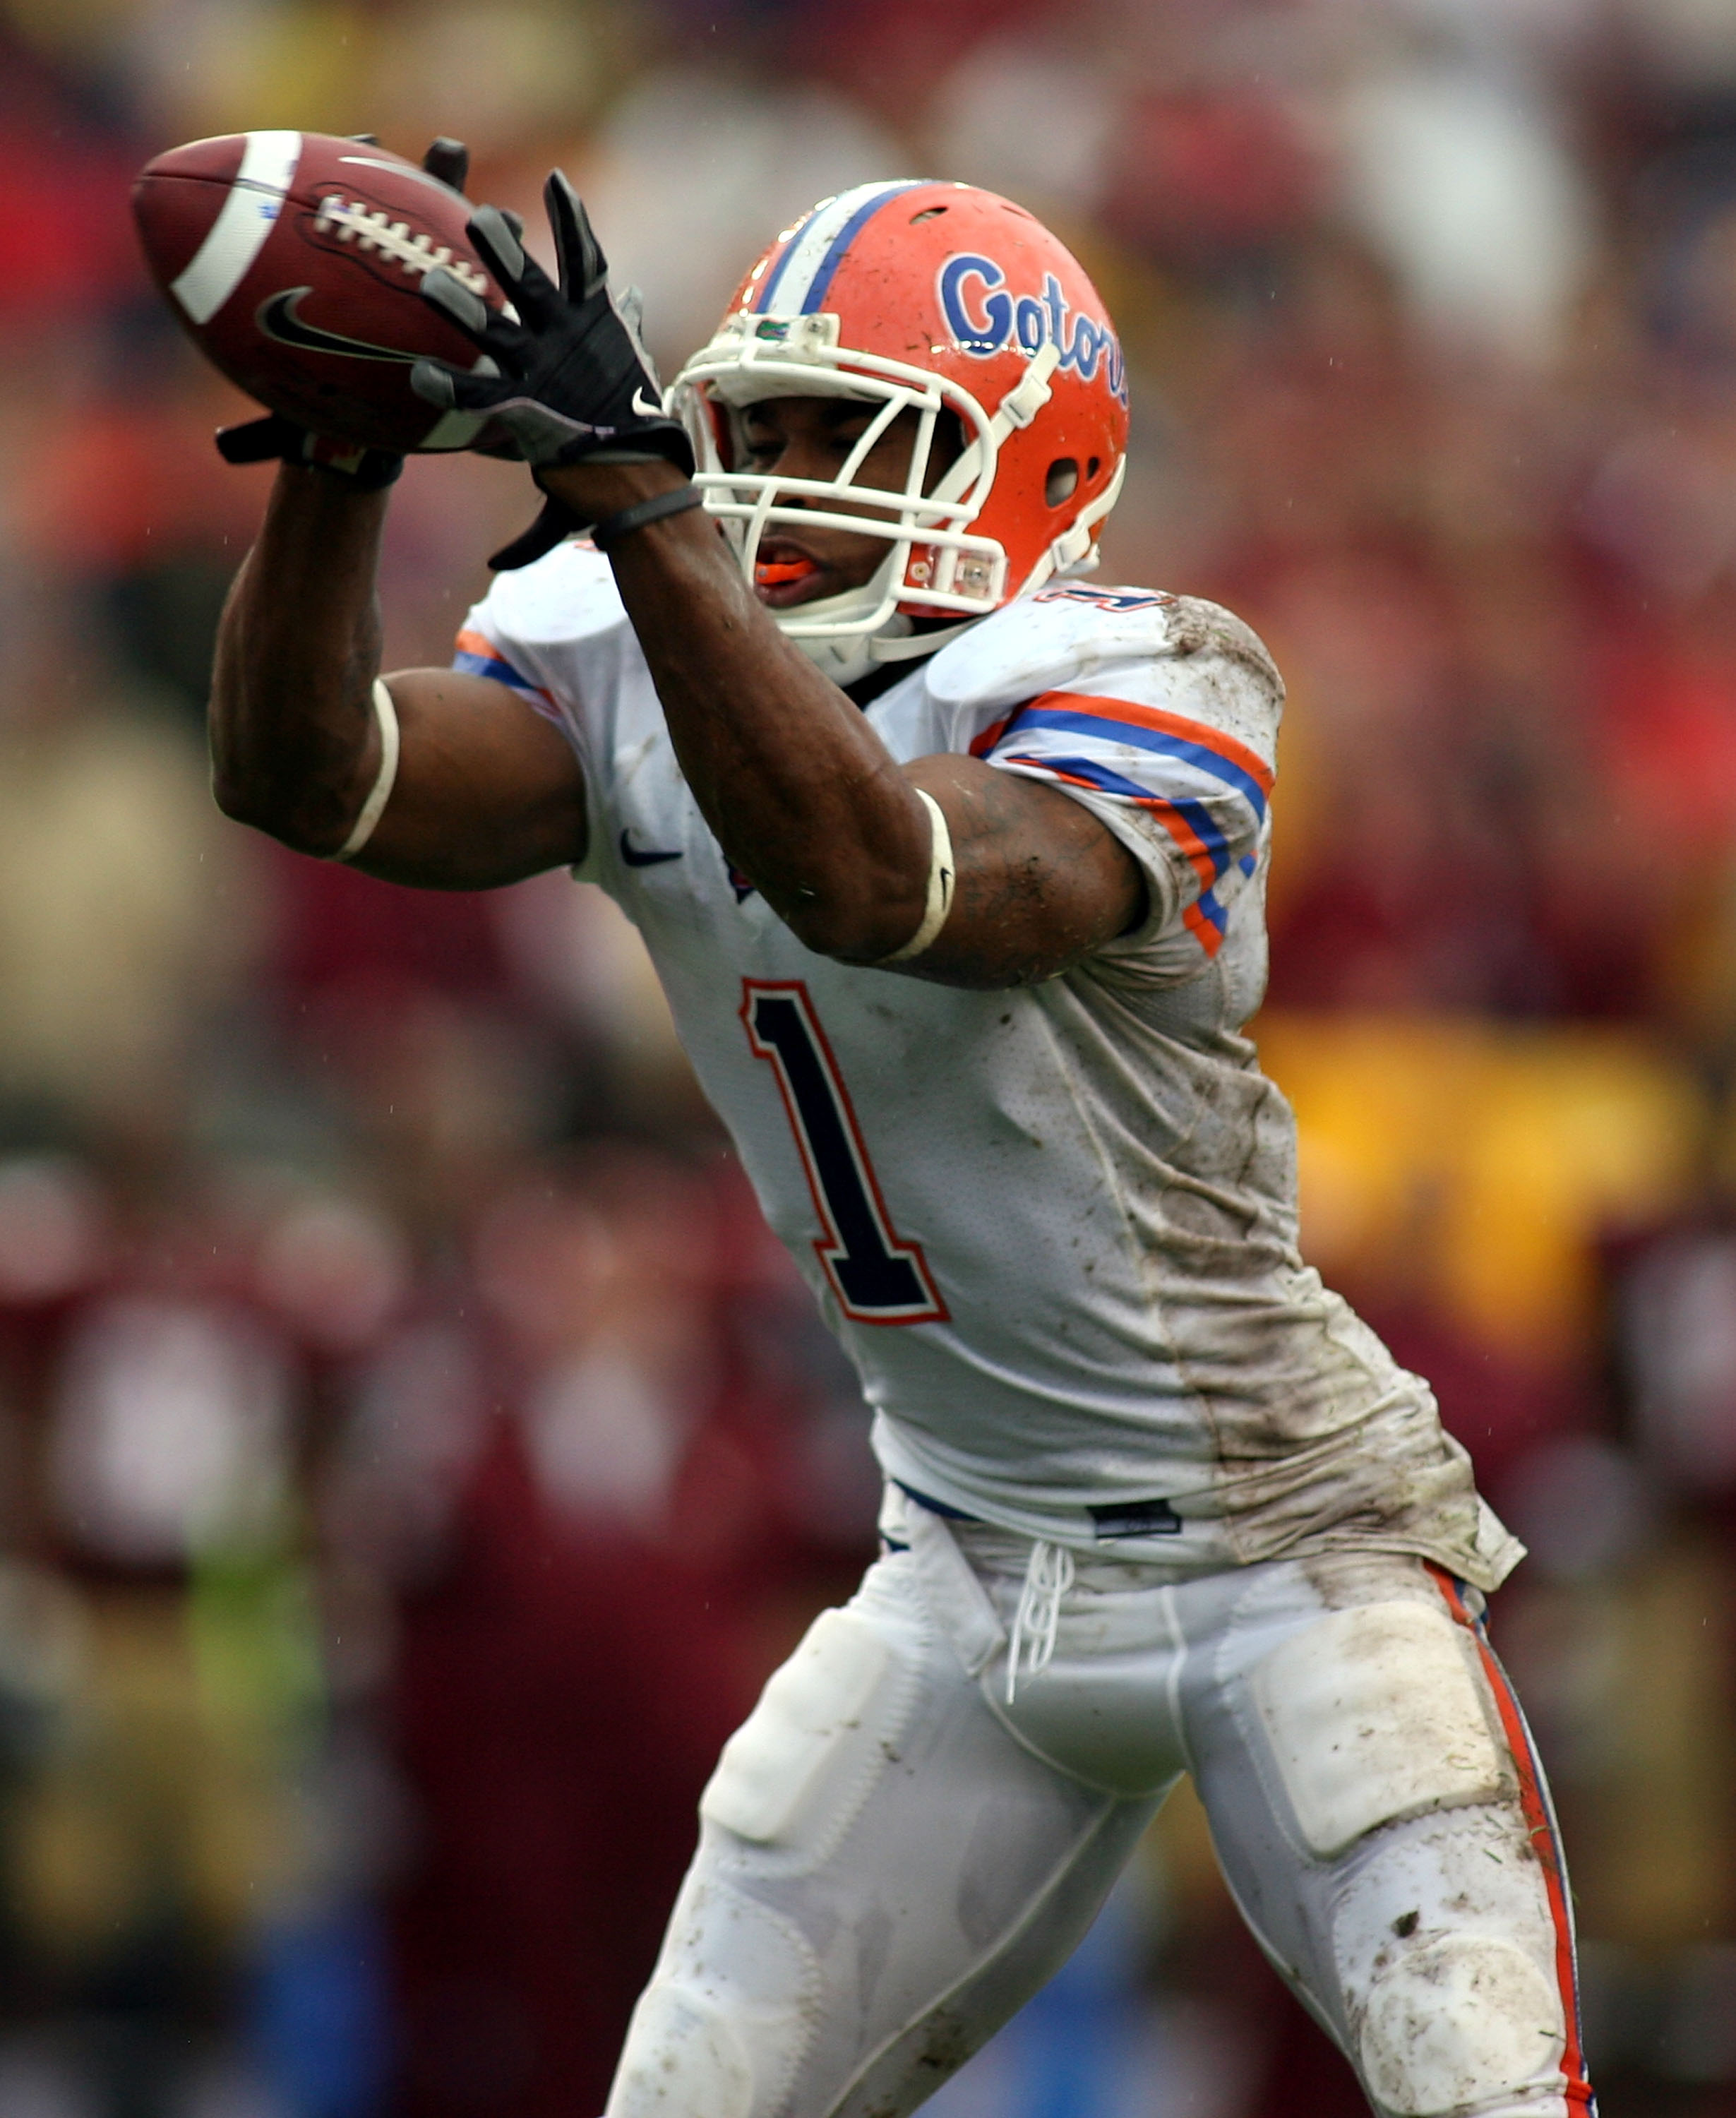 TALLAHASSEE, FL - NOVEMBER 29:  Receiver Percy Harvin #1 of the Florida Gators takes a direct snap and runs for a touchdown  against the Florida State Seminoles at Bobby Bowden Field at Doak Campbell Stadium on November 29, 2008 in Tallahassee, Florida.